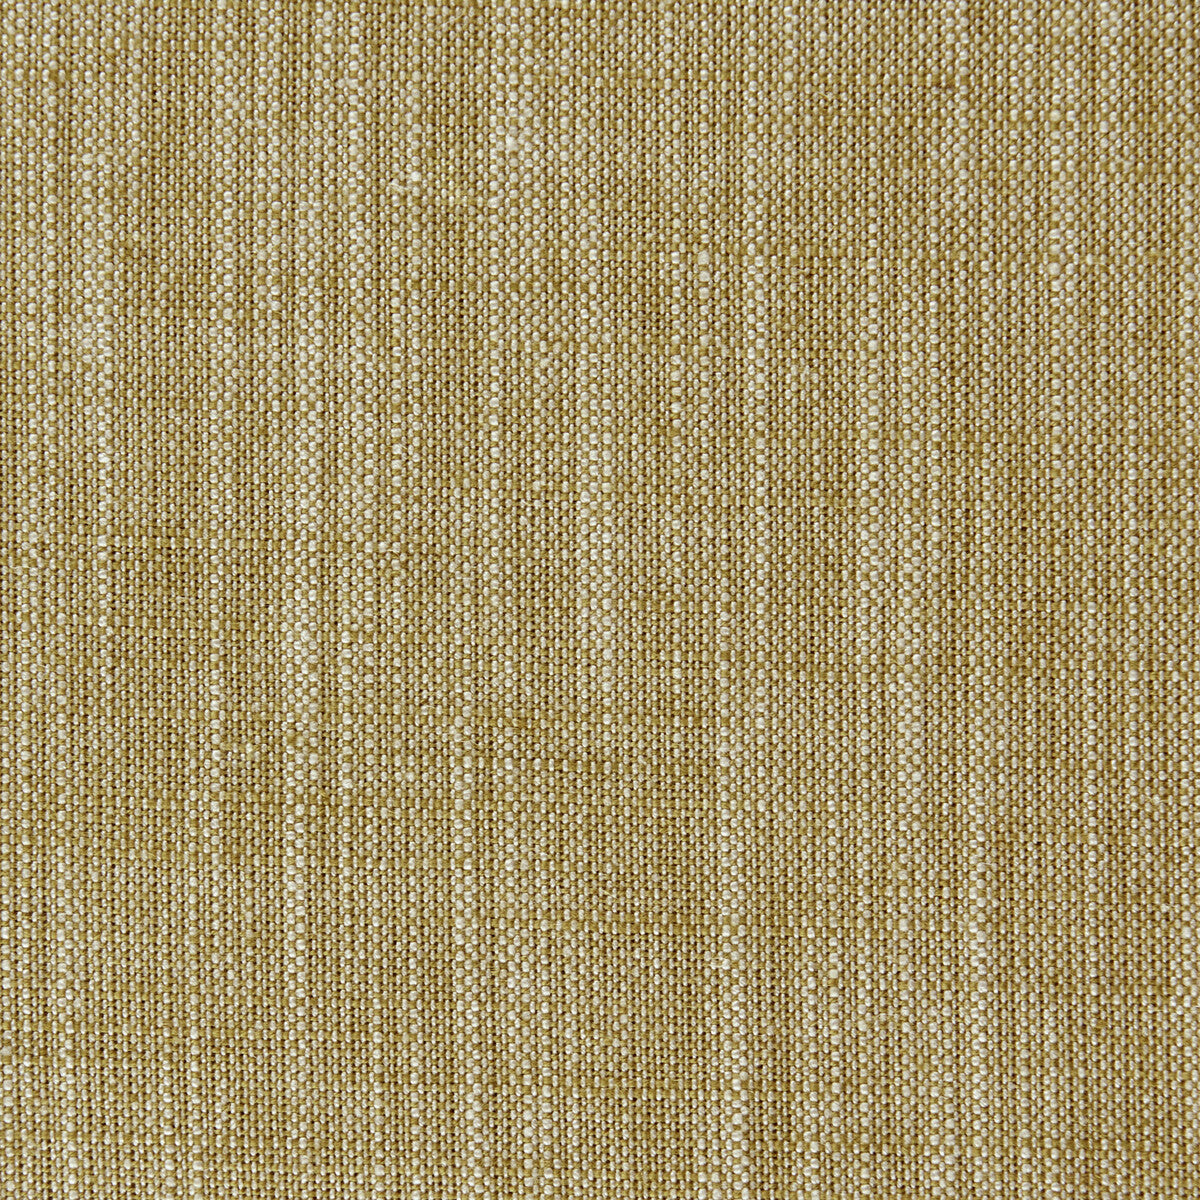 Biarritz fabric in antique color - pattern F0965/02.CAC.0 - by Clarke And Clarke in the Clarke &amp; Clarke Biarritz collection